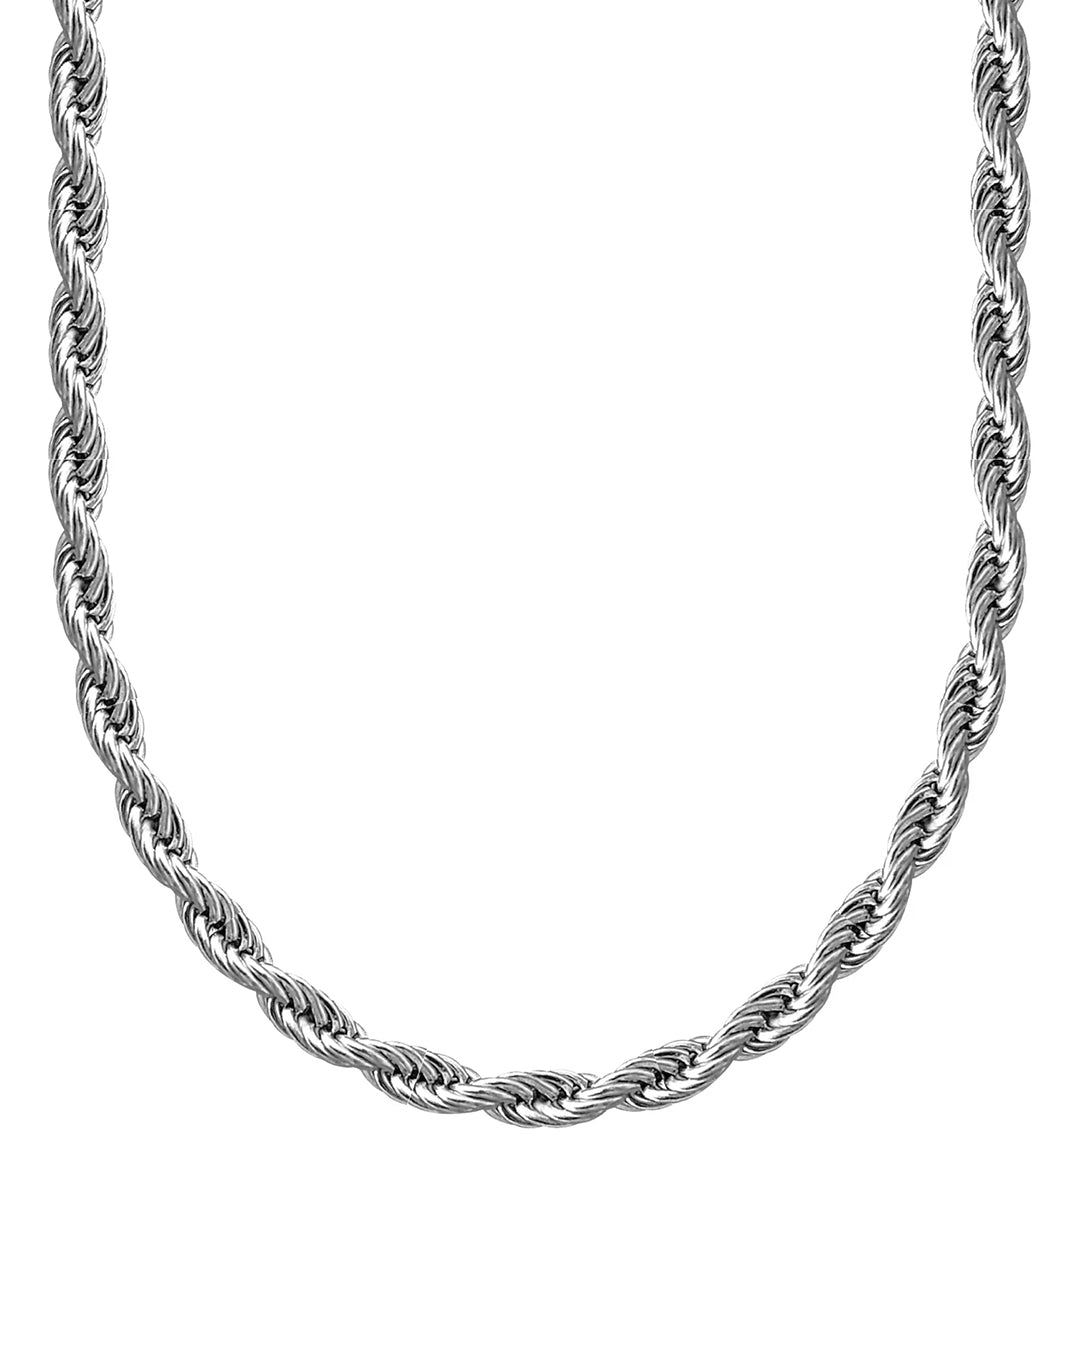 Rope Chain 5mm